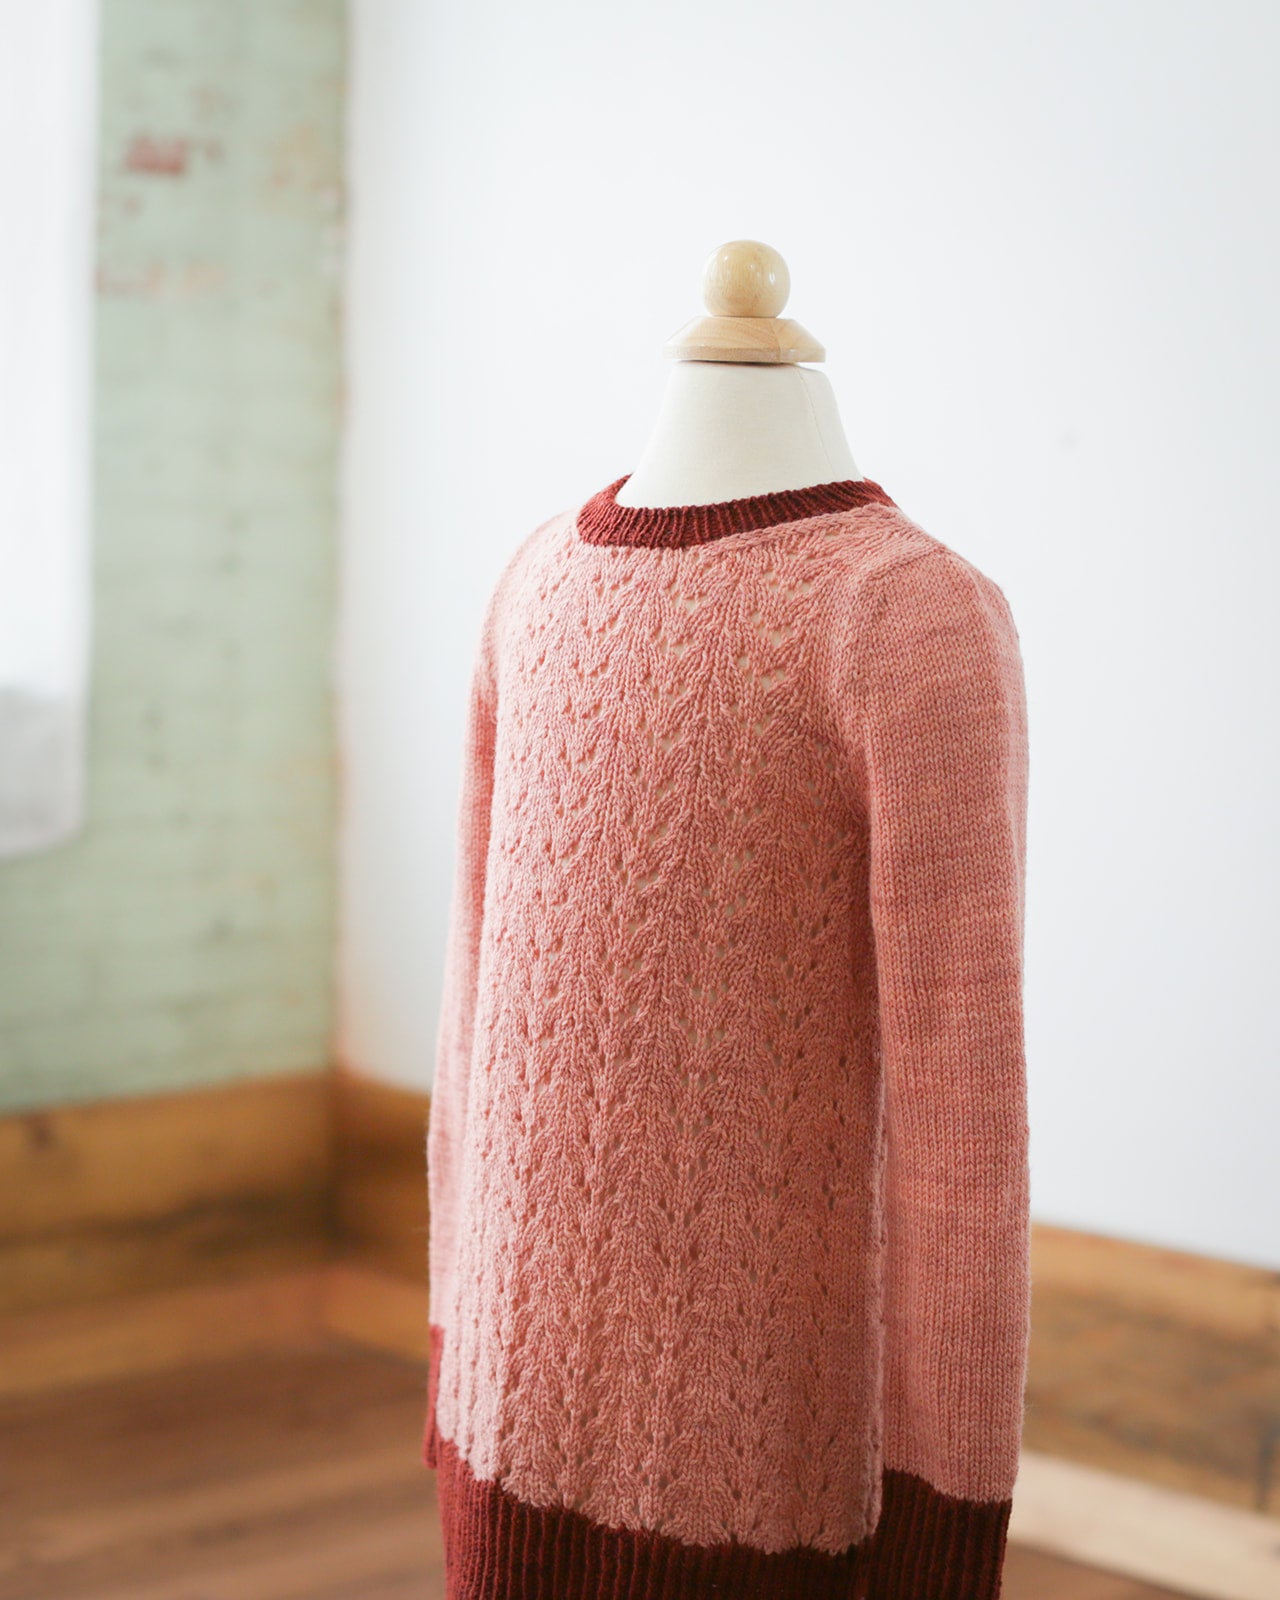 A dress length version of the Kid's Classic sweater - knit in light pink yarn from the lace body and dark pink yarn for the cuffs, hem, and collar - hangs on a dress form.